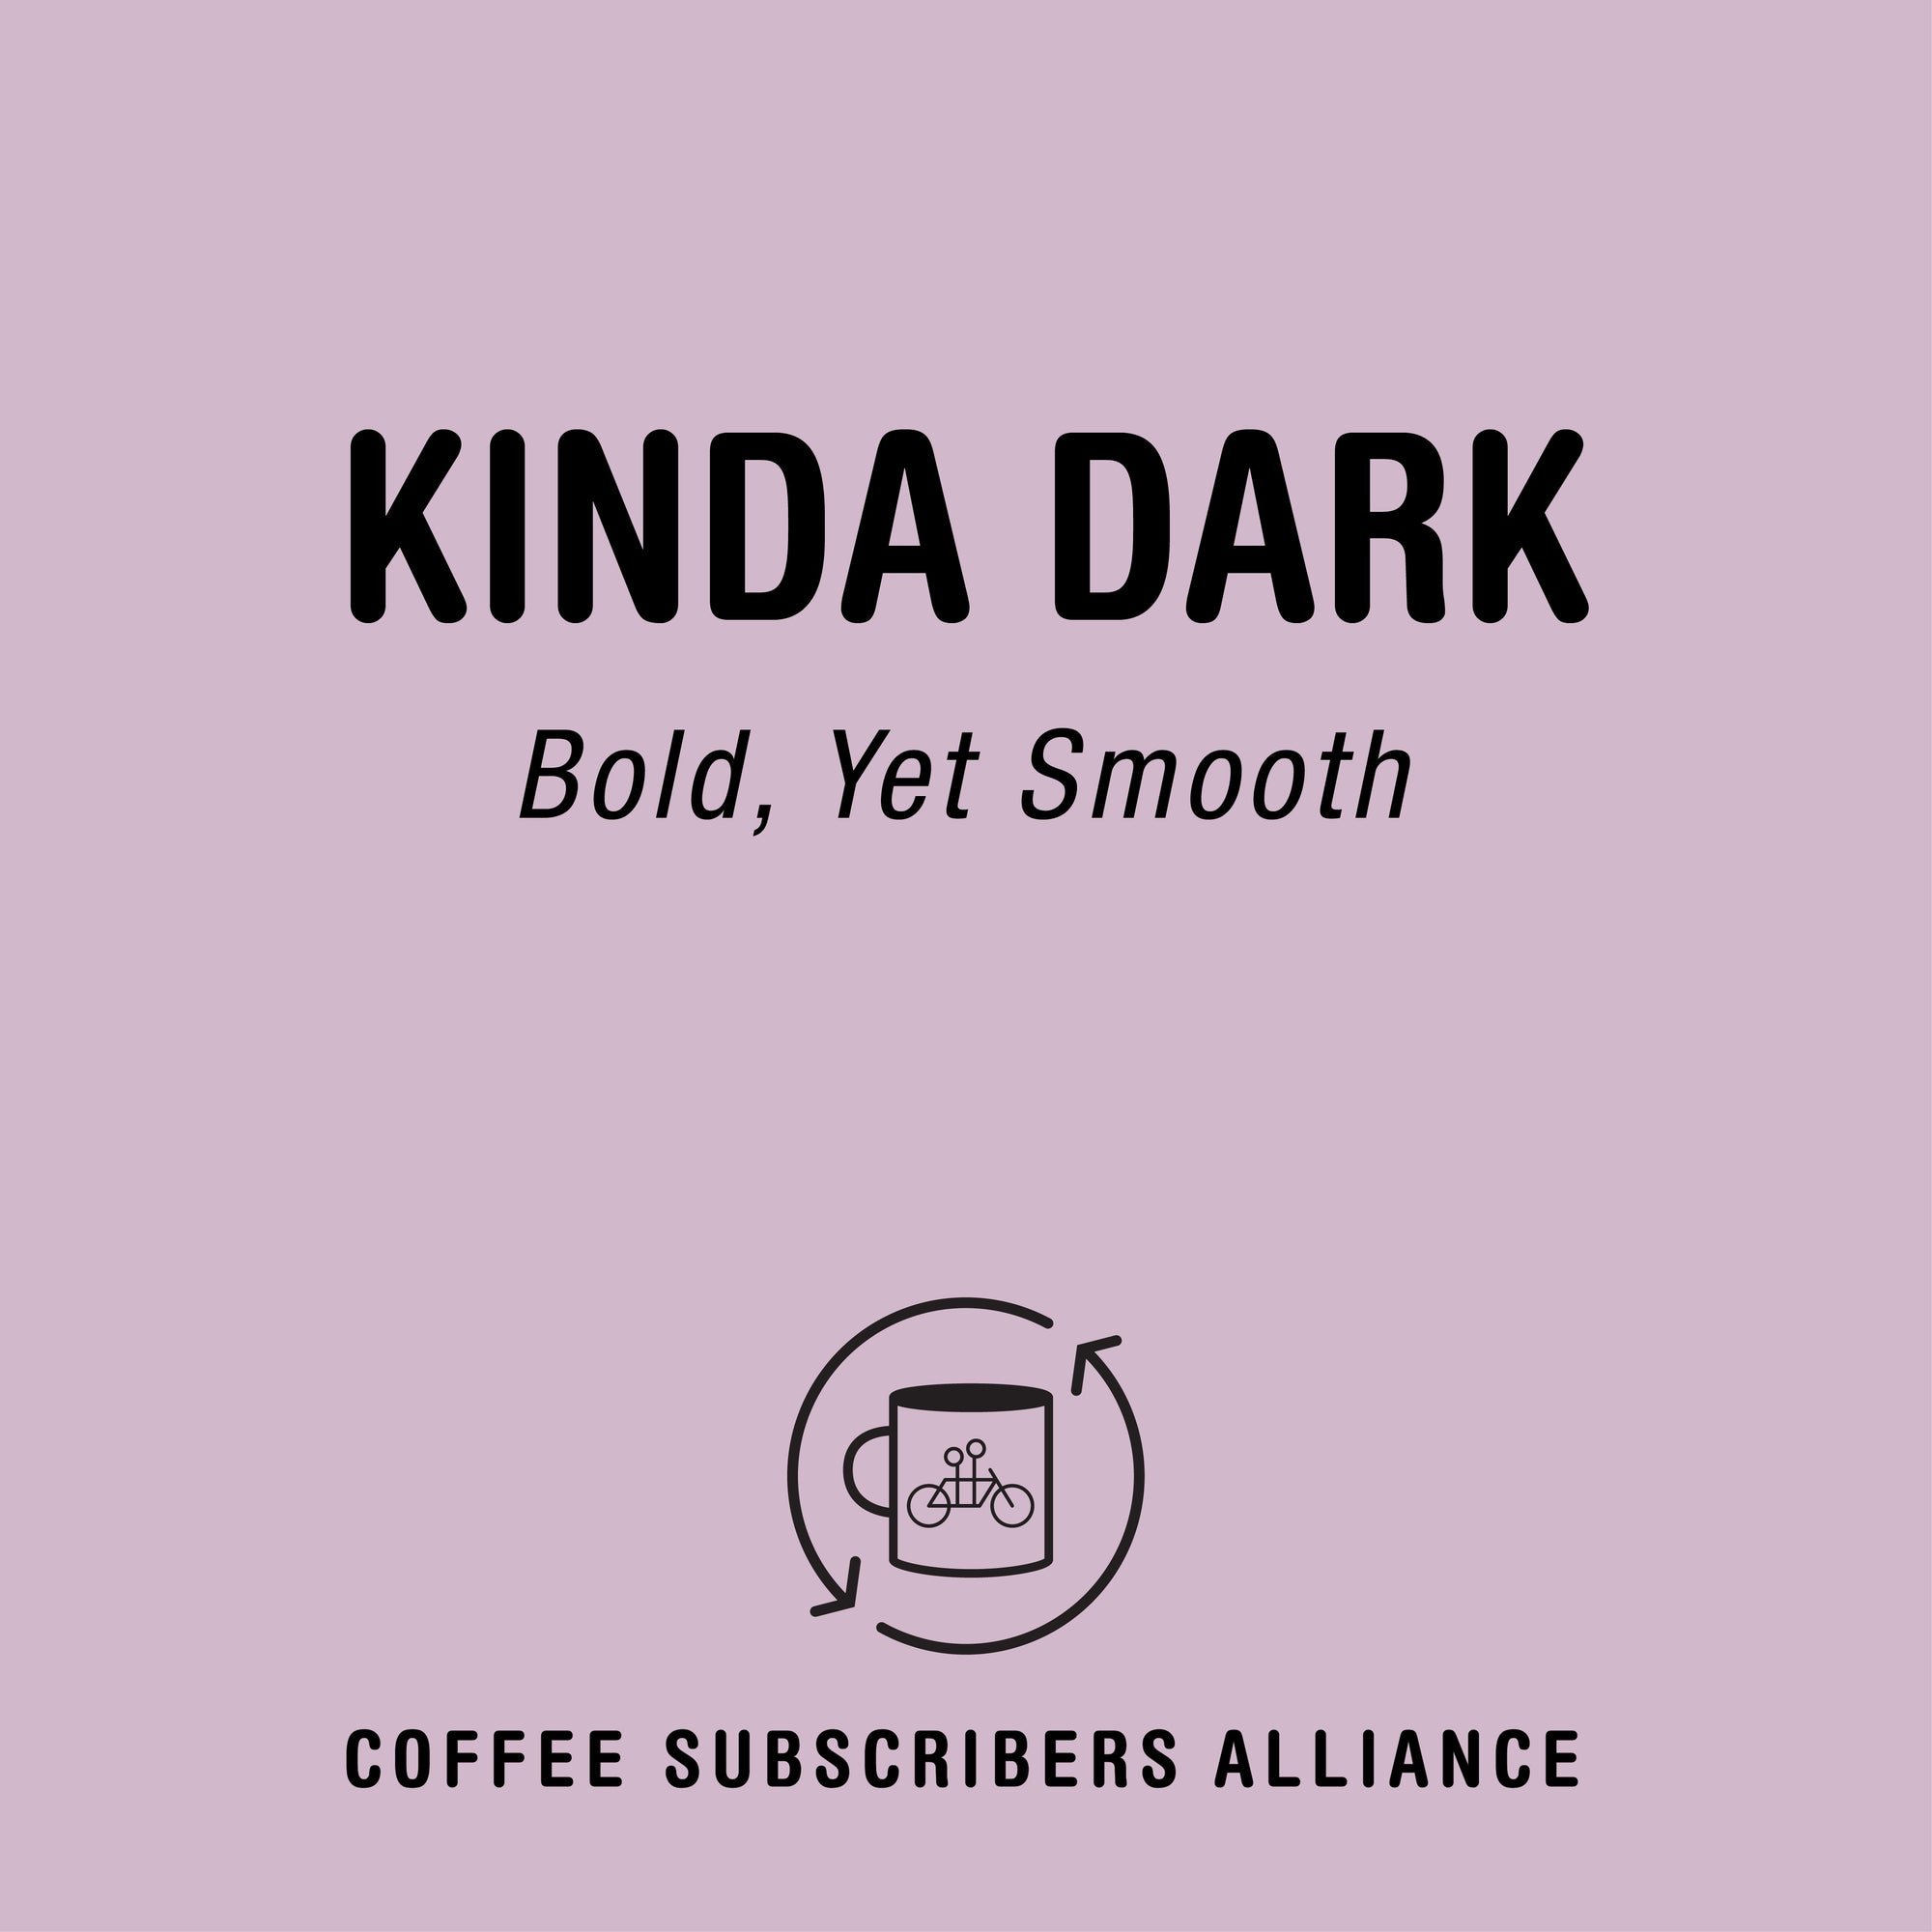 A promotional graphic for Tandem's "Kinda Dark Subscription Gift - 8 Weeks x 3" with the text "kinda dark, bold, yet smooth" in black on a pale purple background, accompanied by a logo featuring a coffee cup.